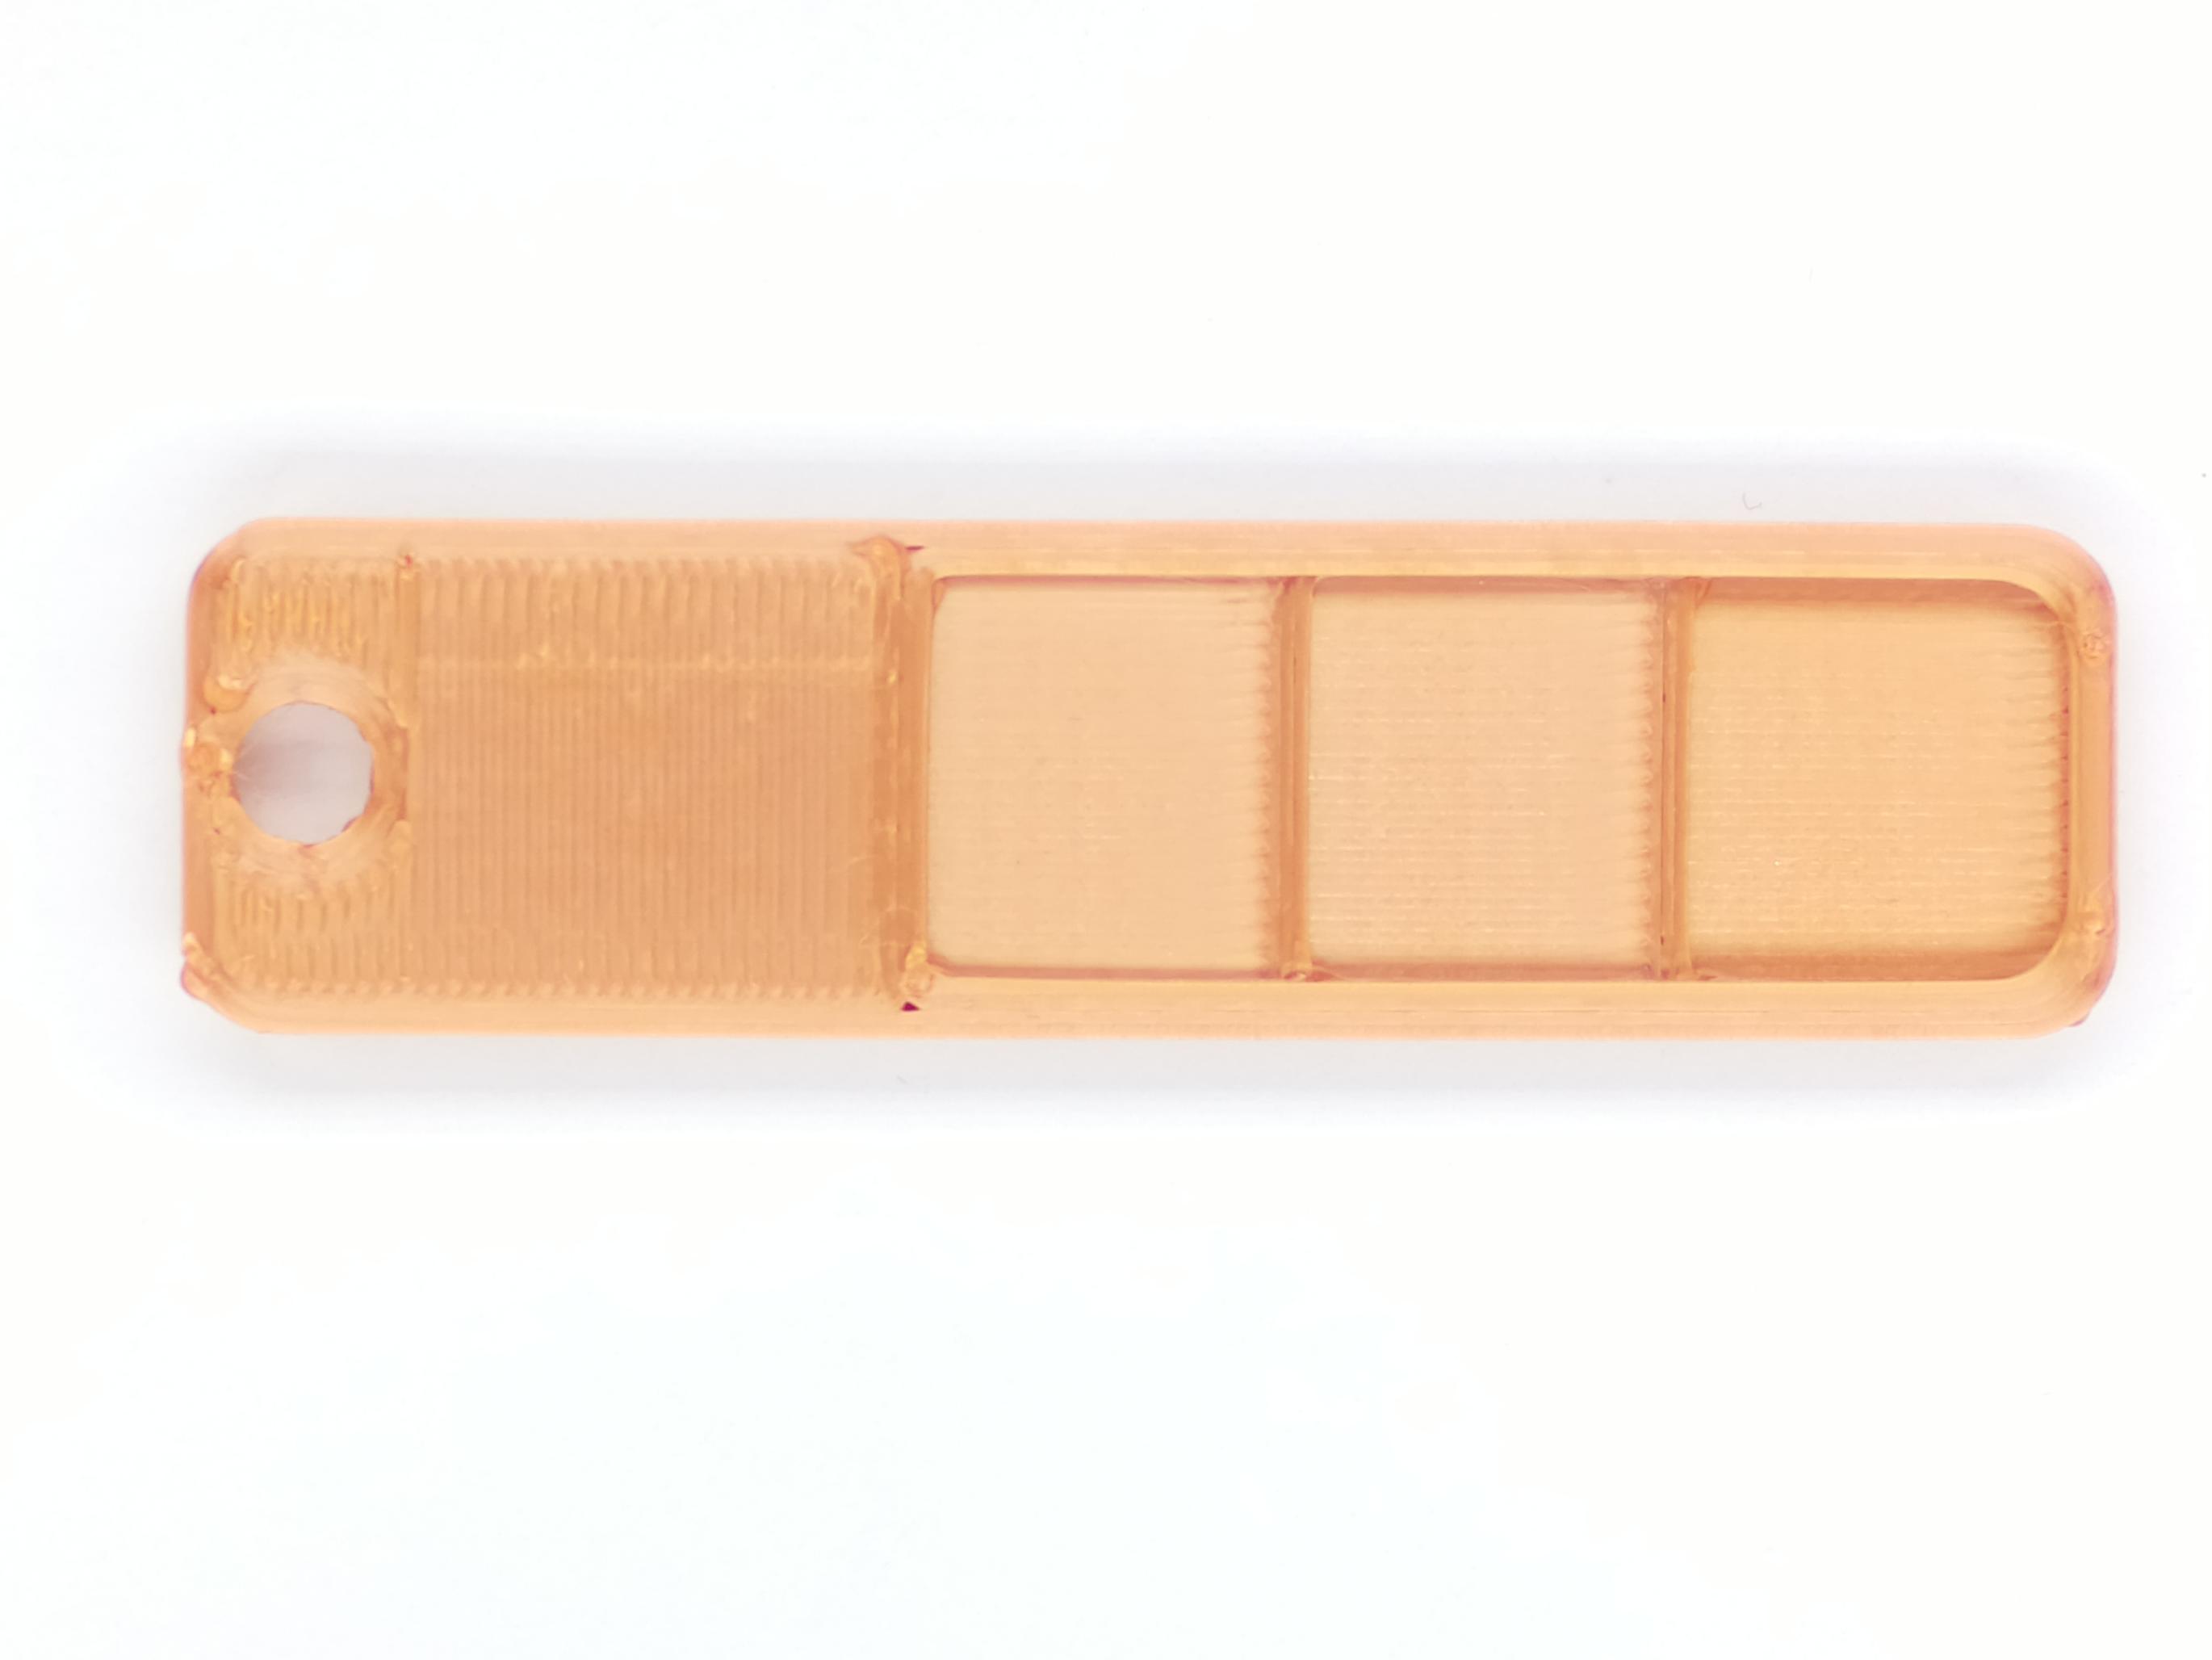 An image of the front of the color swatch.